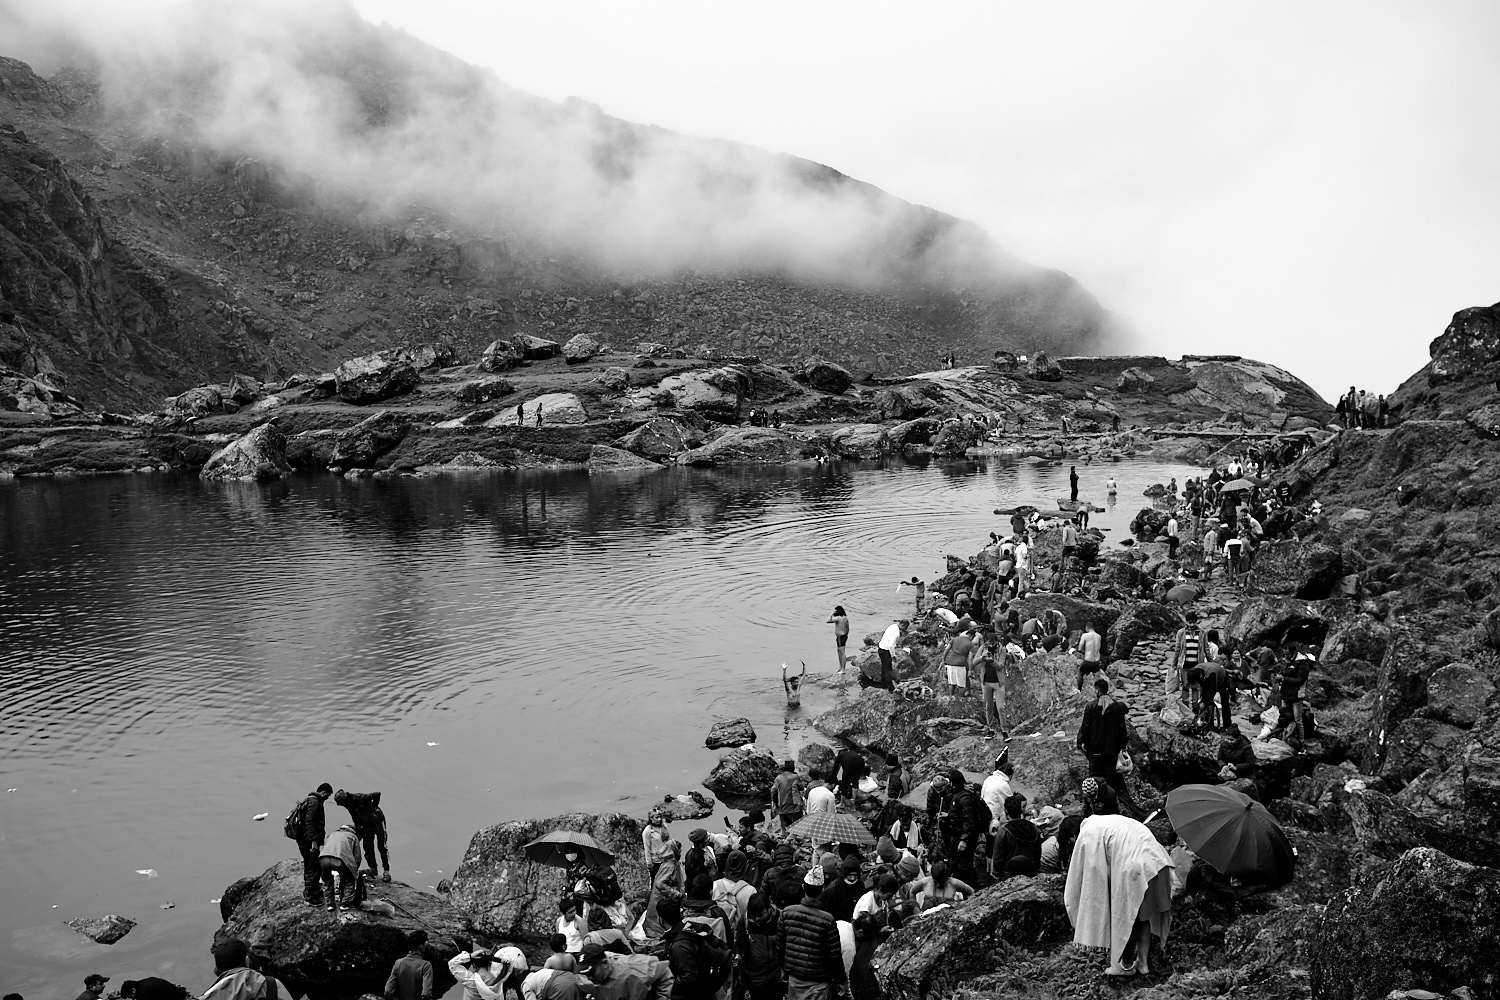 Devotees performing rituals including taking a dip in in the lake